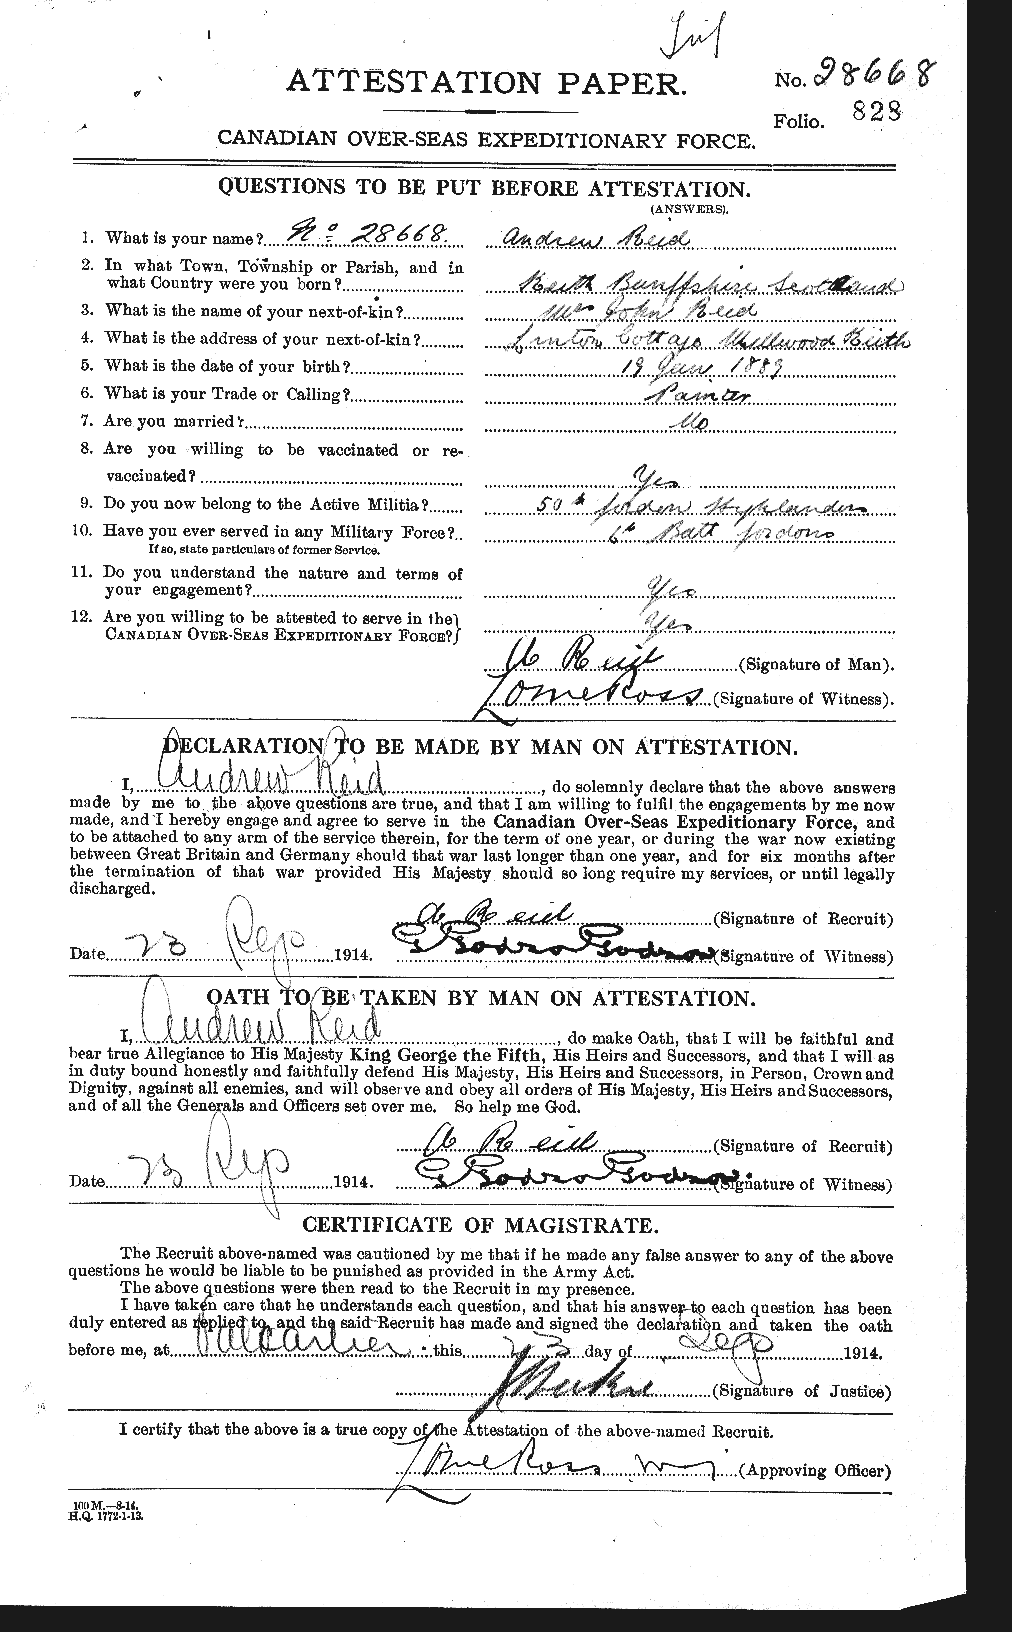 Personnel Records of the First World War - CEF 597819a